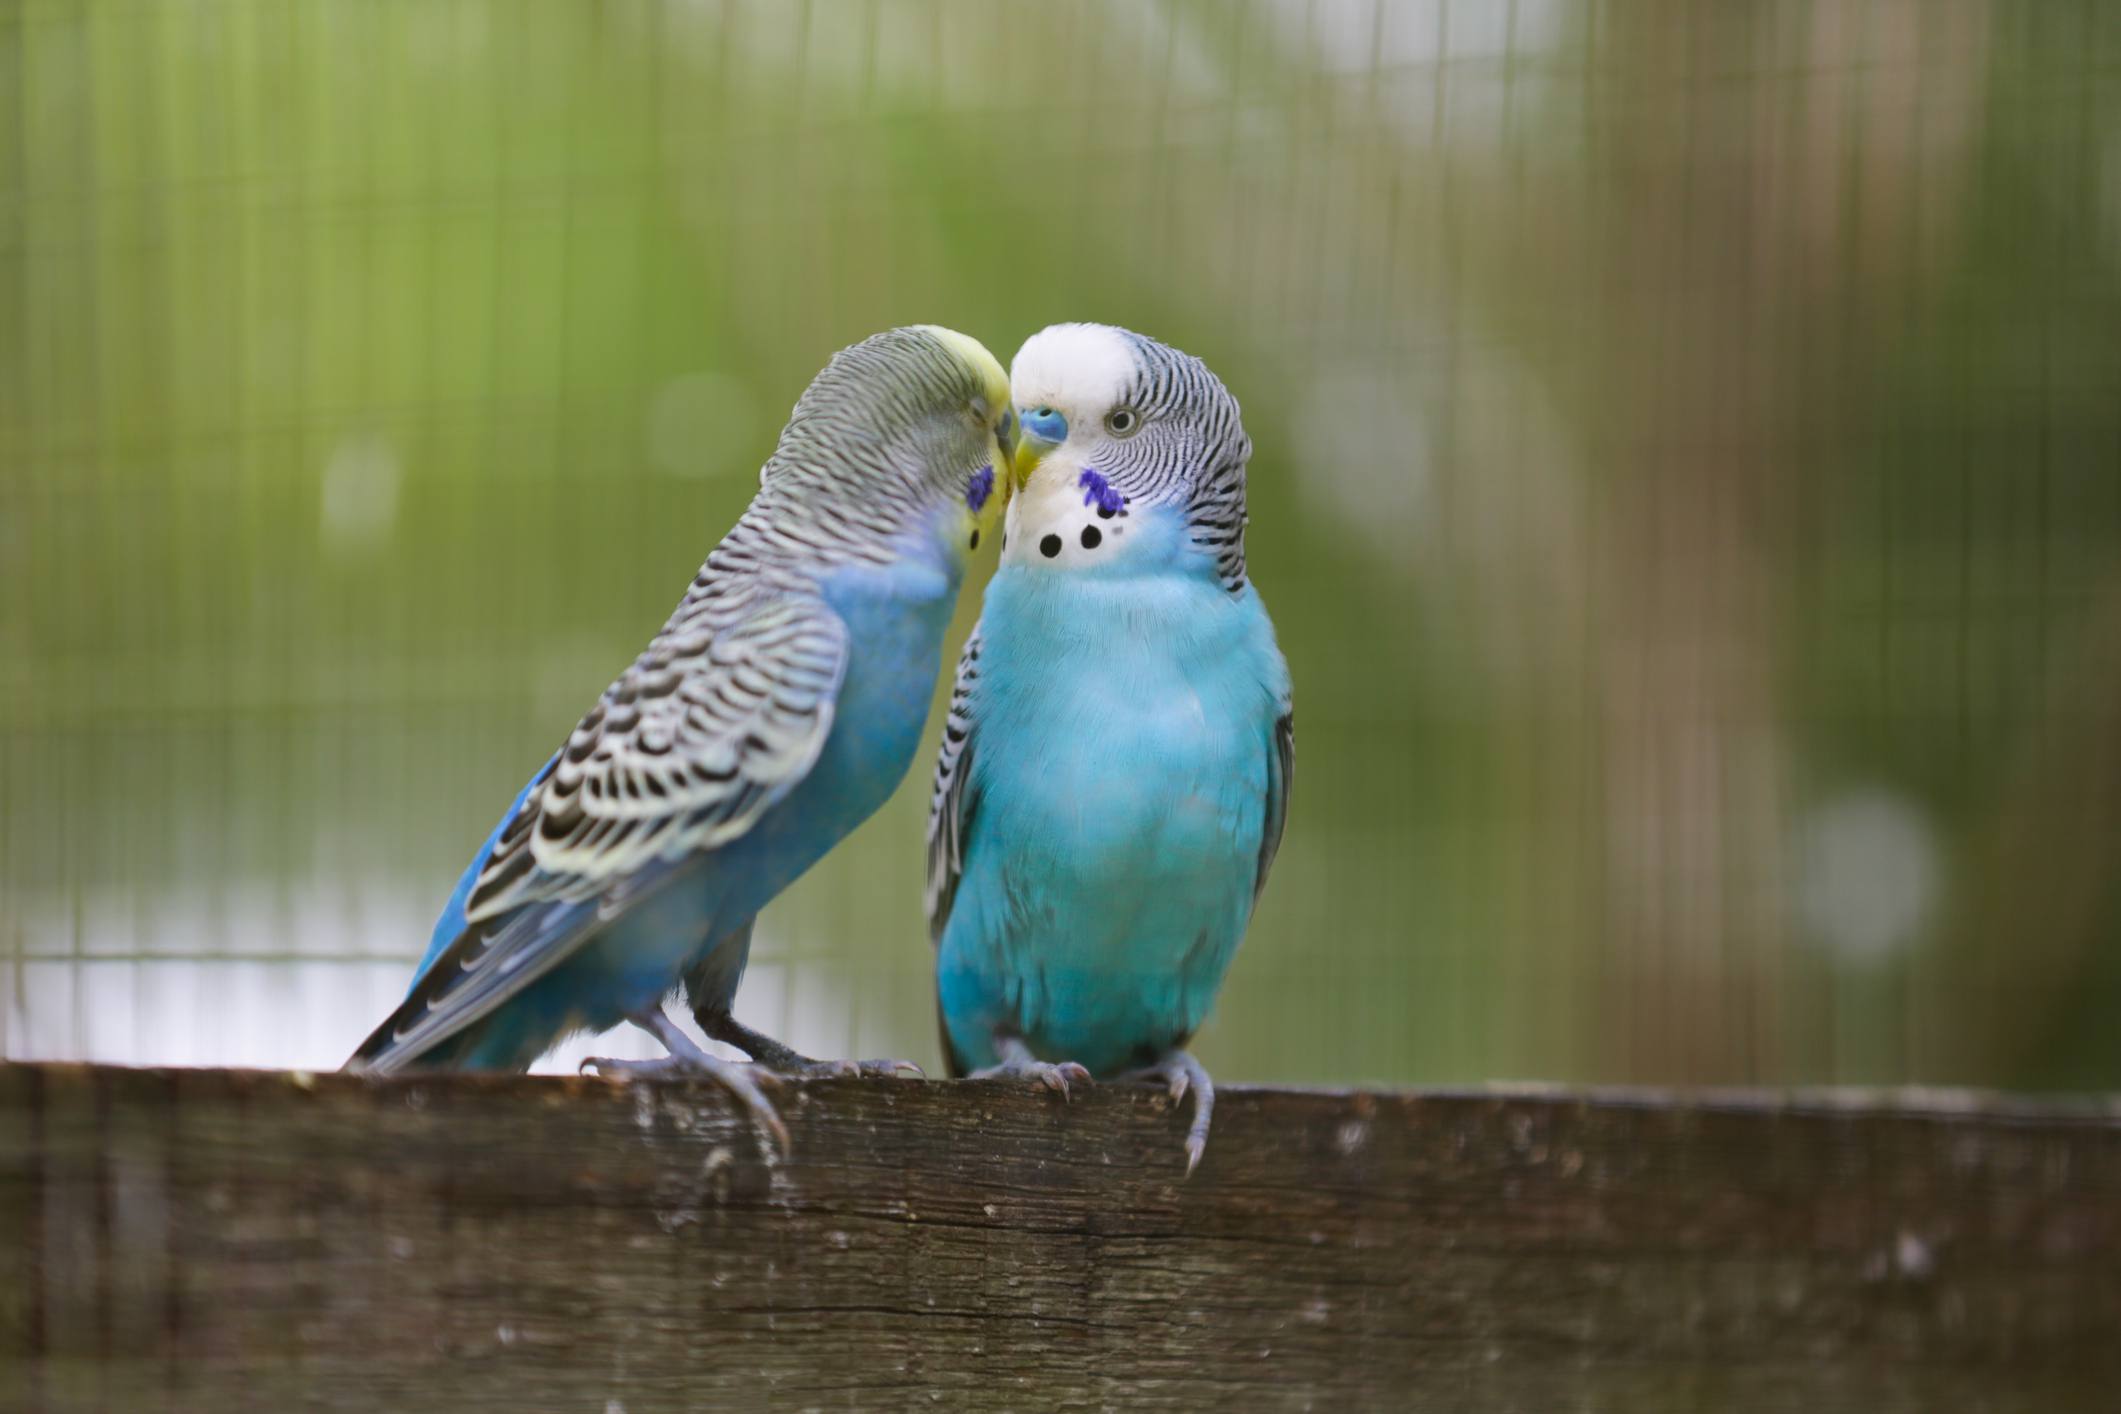 Two budgies on a piece of wood